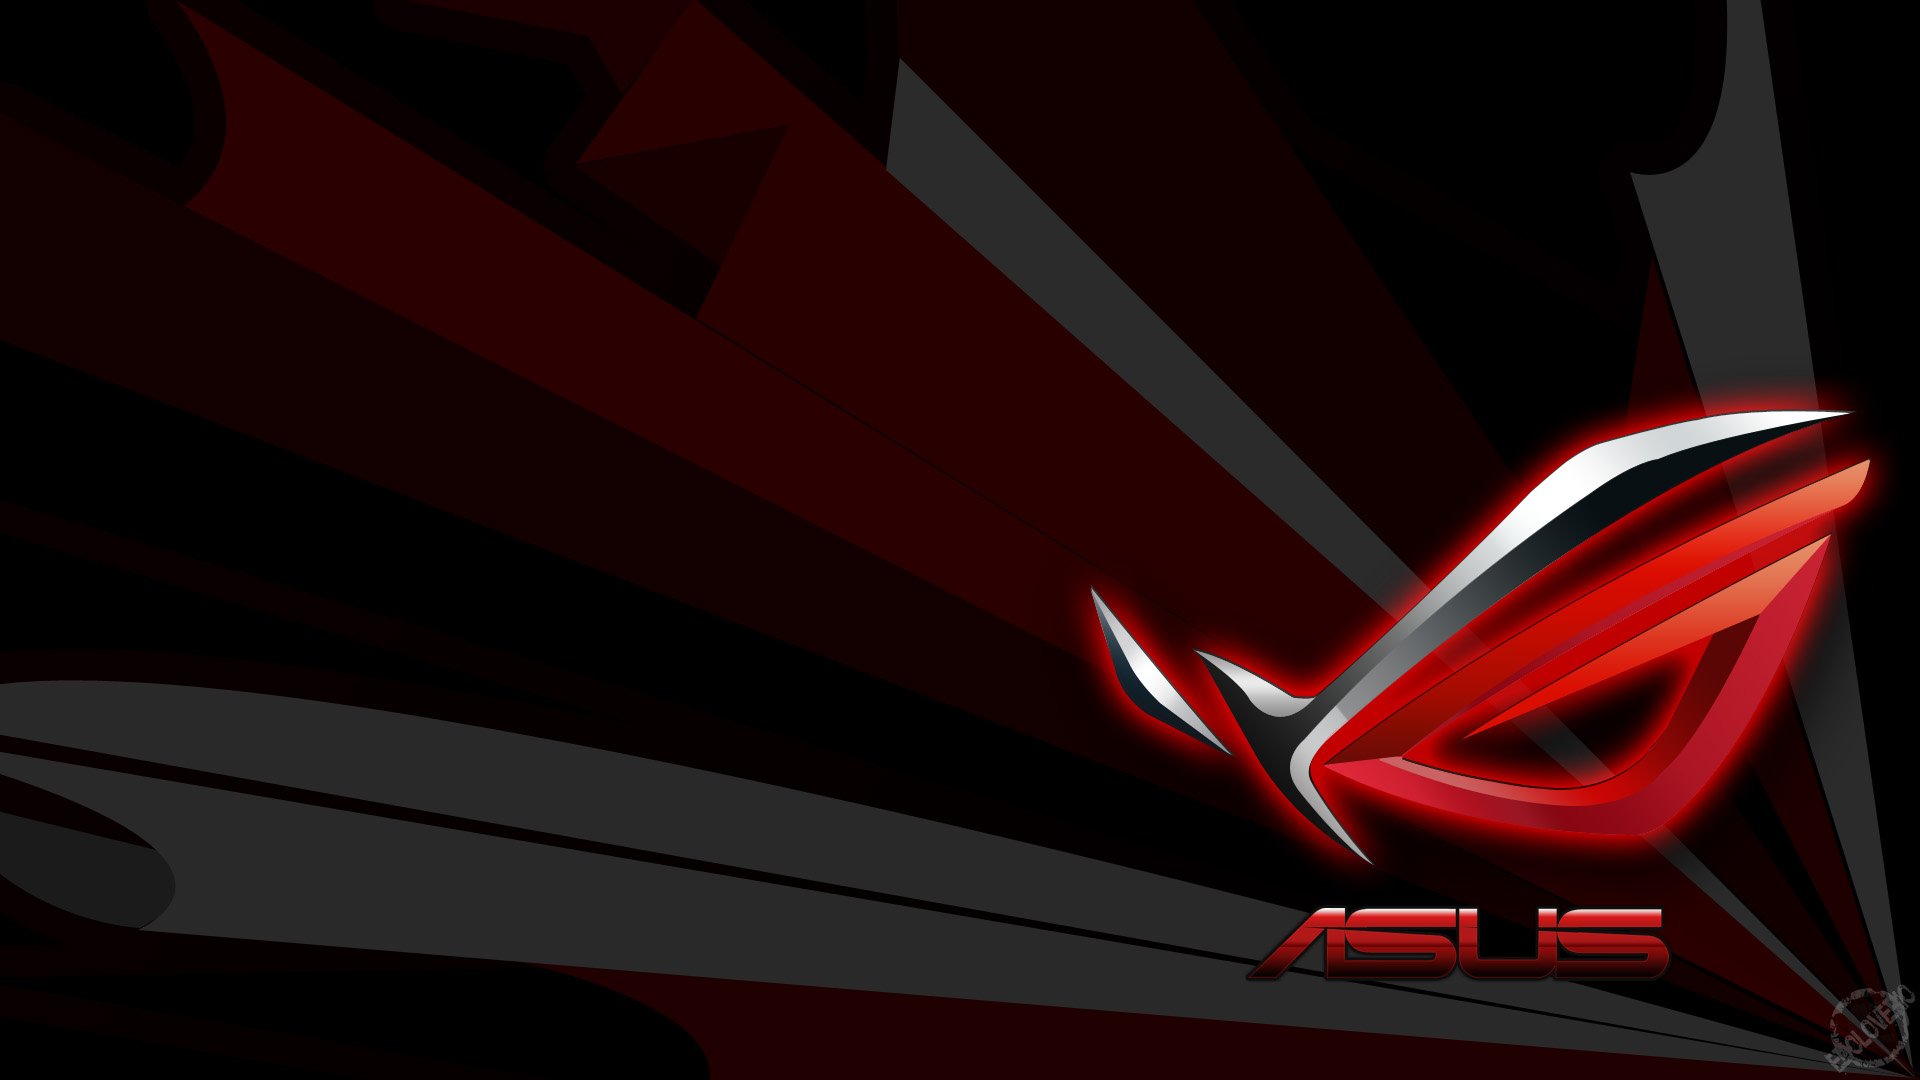 Asus Full HD Wallpaper and Background Image | 1920x1080 | ID:177602